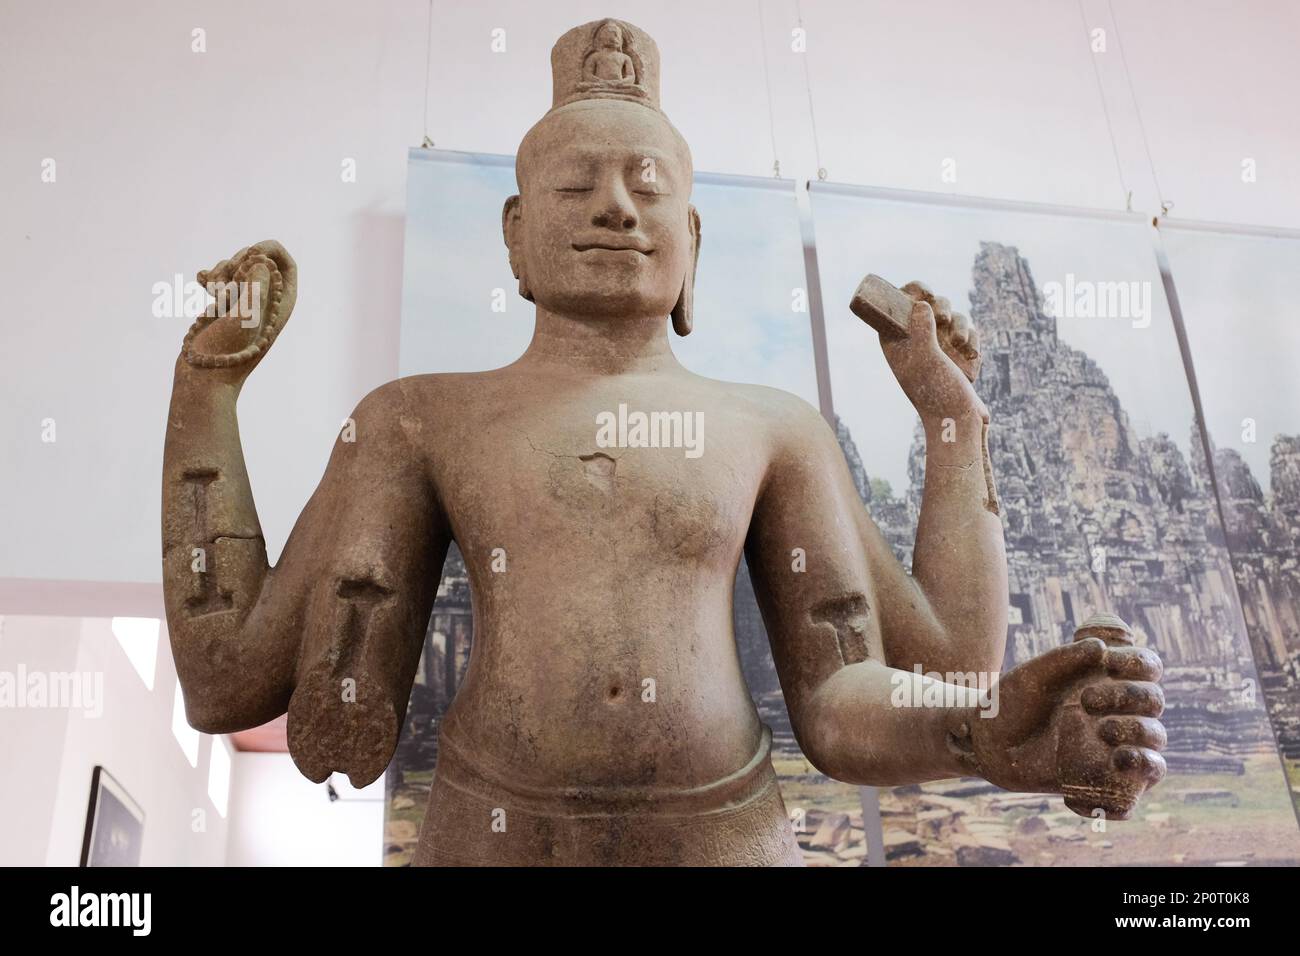 Ancient Khmer Hindu god statue in National Museum of Cambodia, Pnomh Penh. Travel photo, museum collection Stock Photo